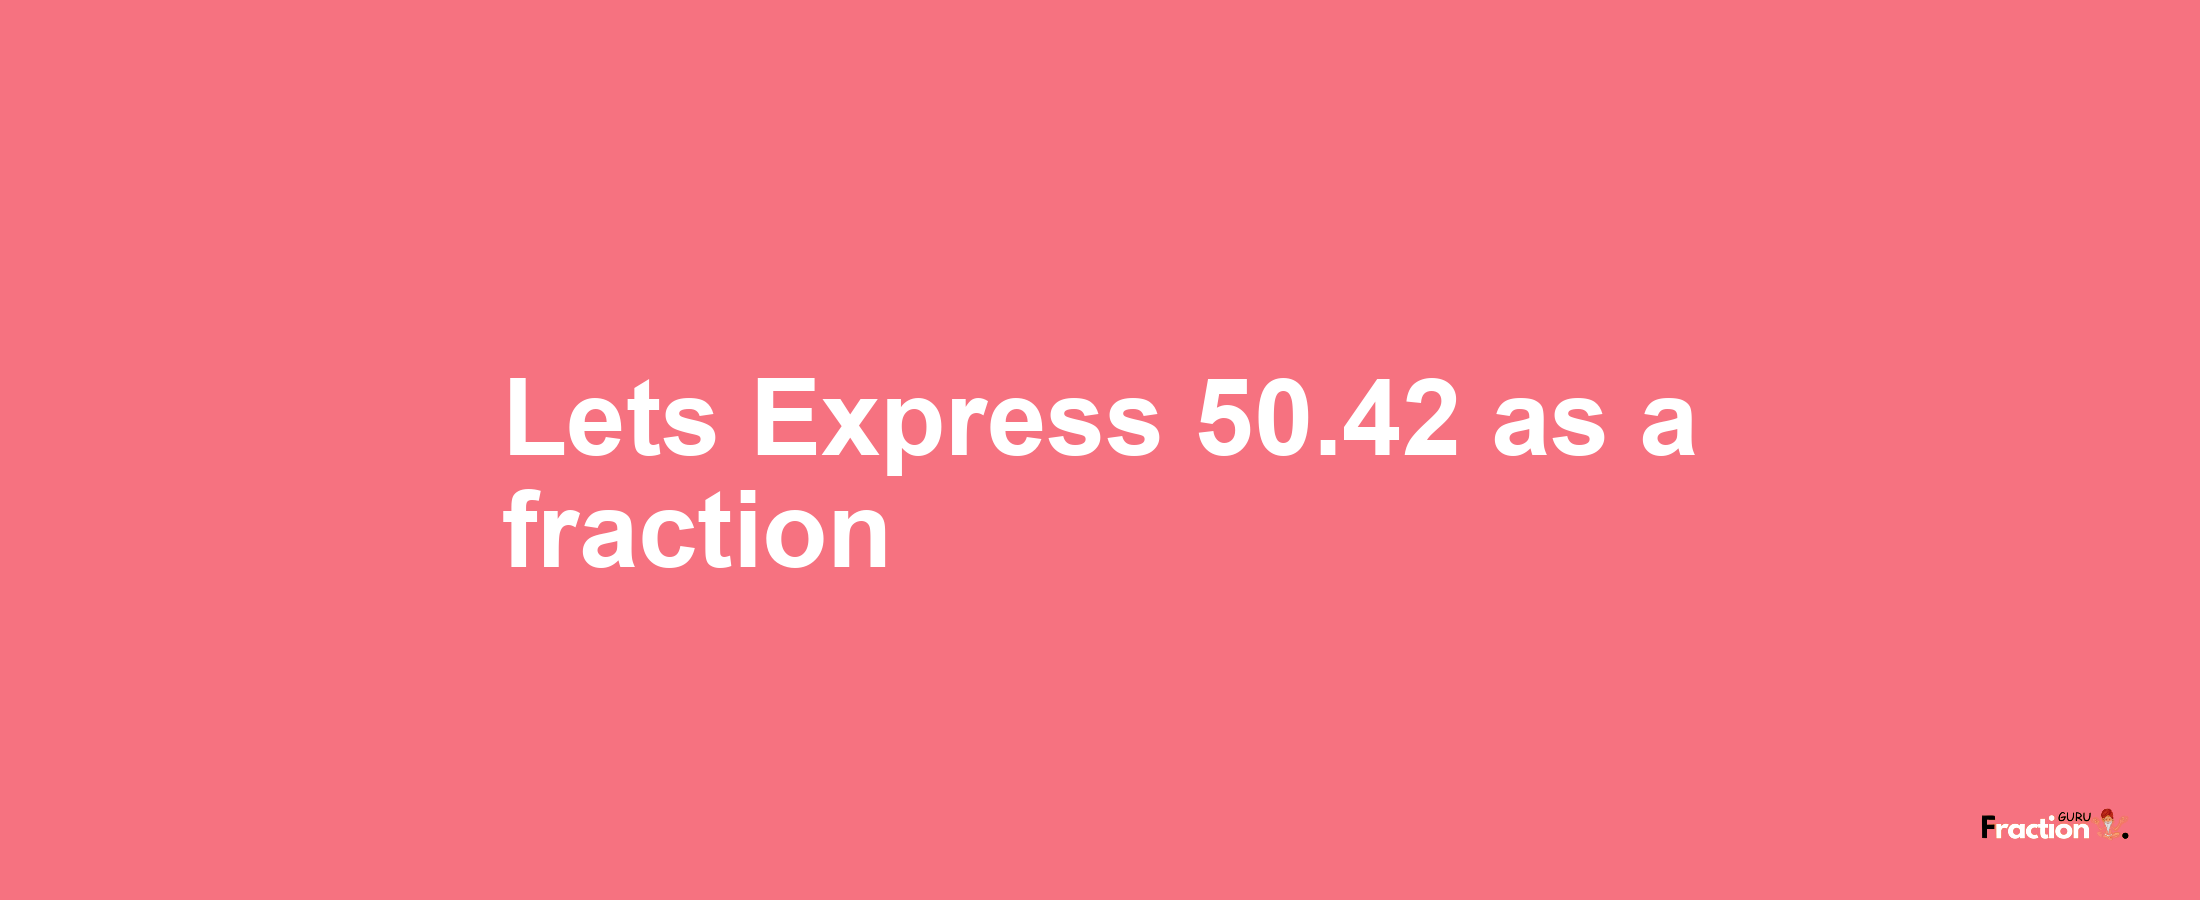 Lets Express 50.42 as afraction